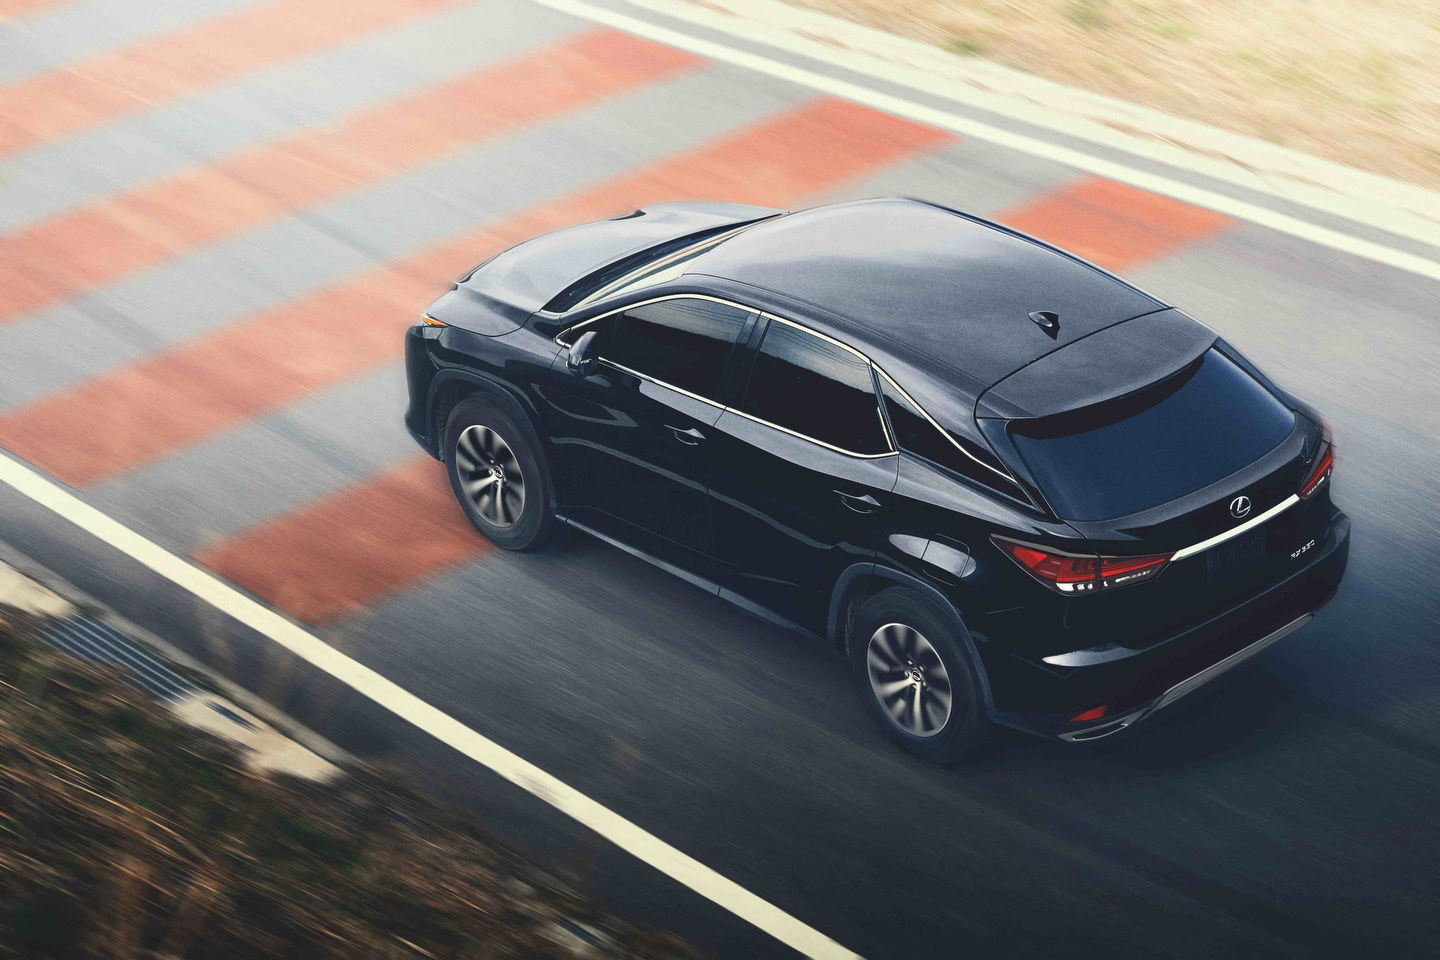 Three Safety Technologies that Make Every Drive Safer in the 2022 Lexus RX